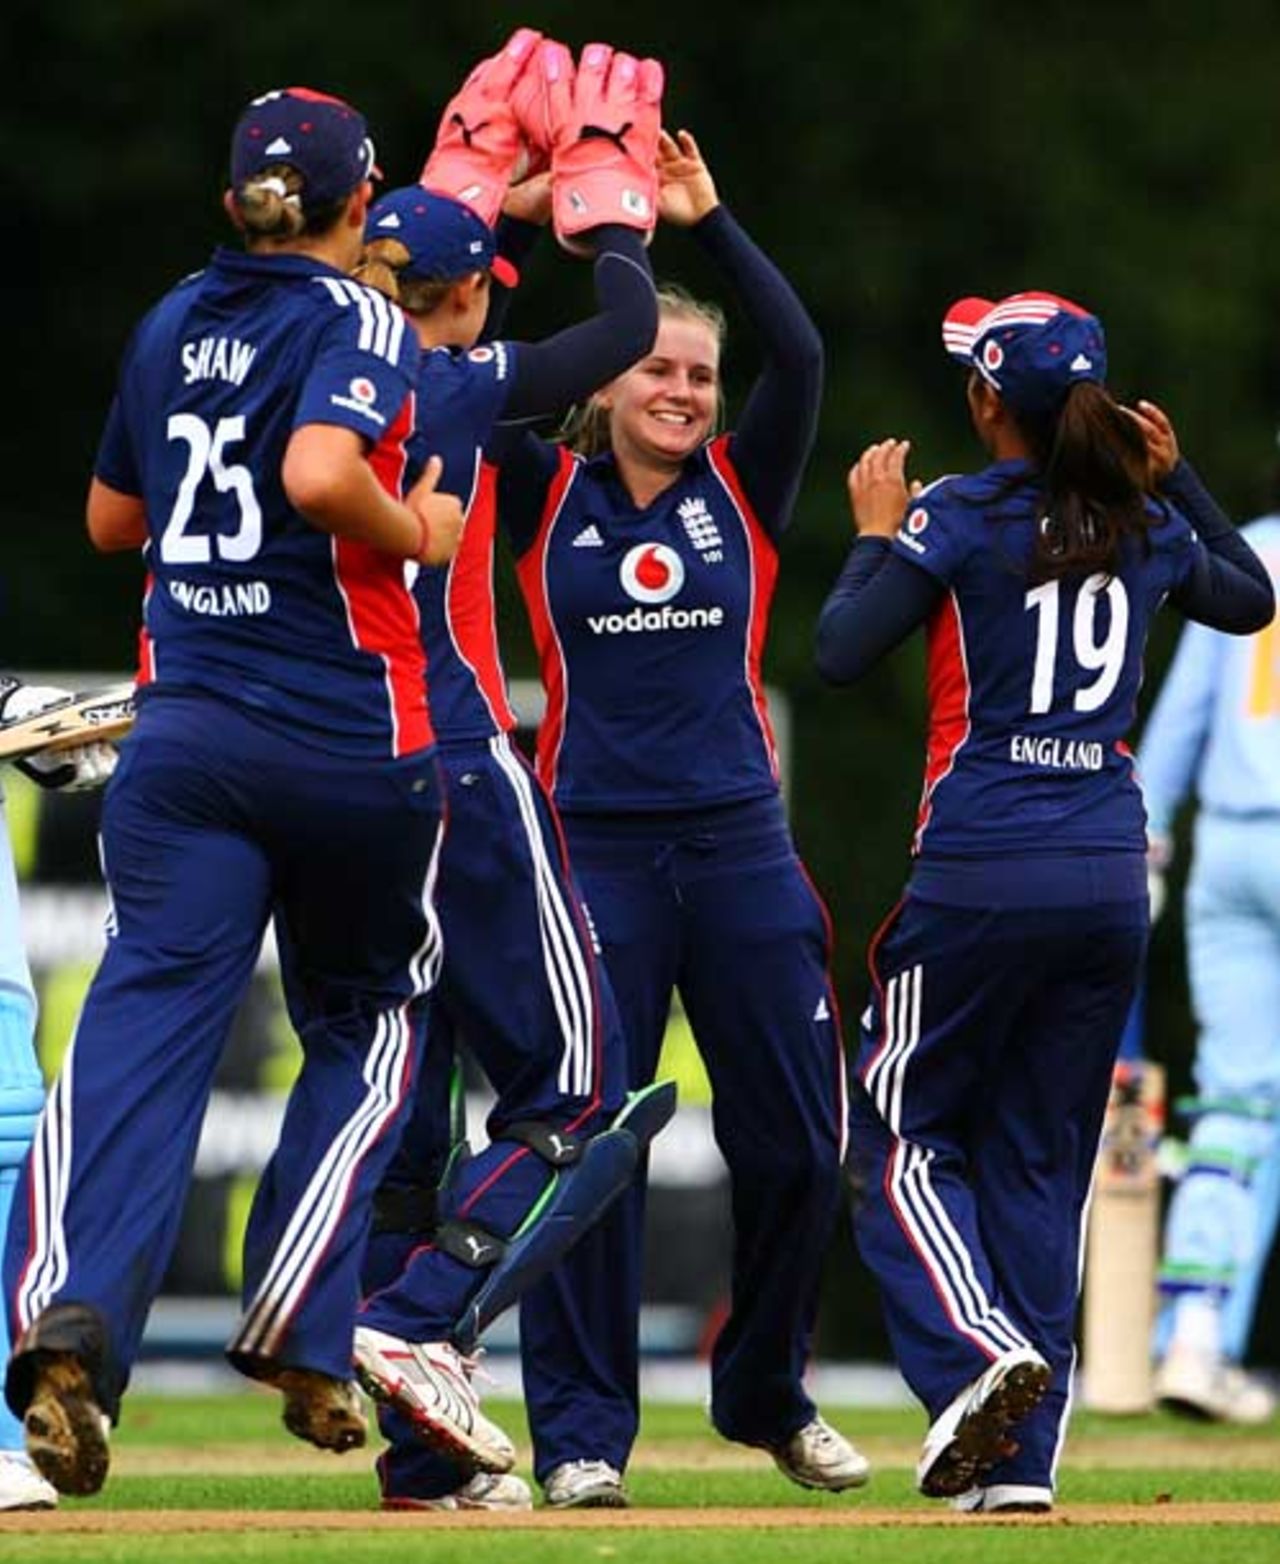 Holly Colvin's three wickets stalled India's innings, England v India, 4th women's ODI, Arundel, September 7, 2008